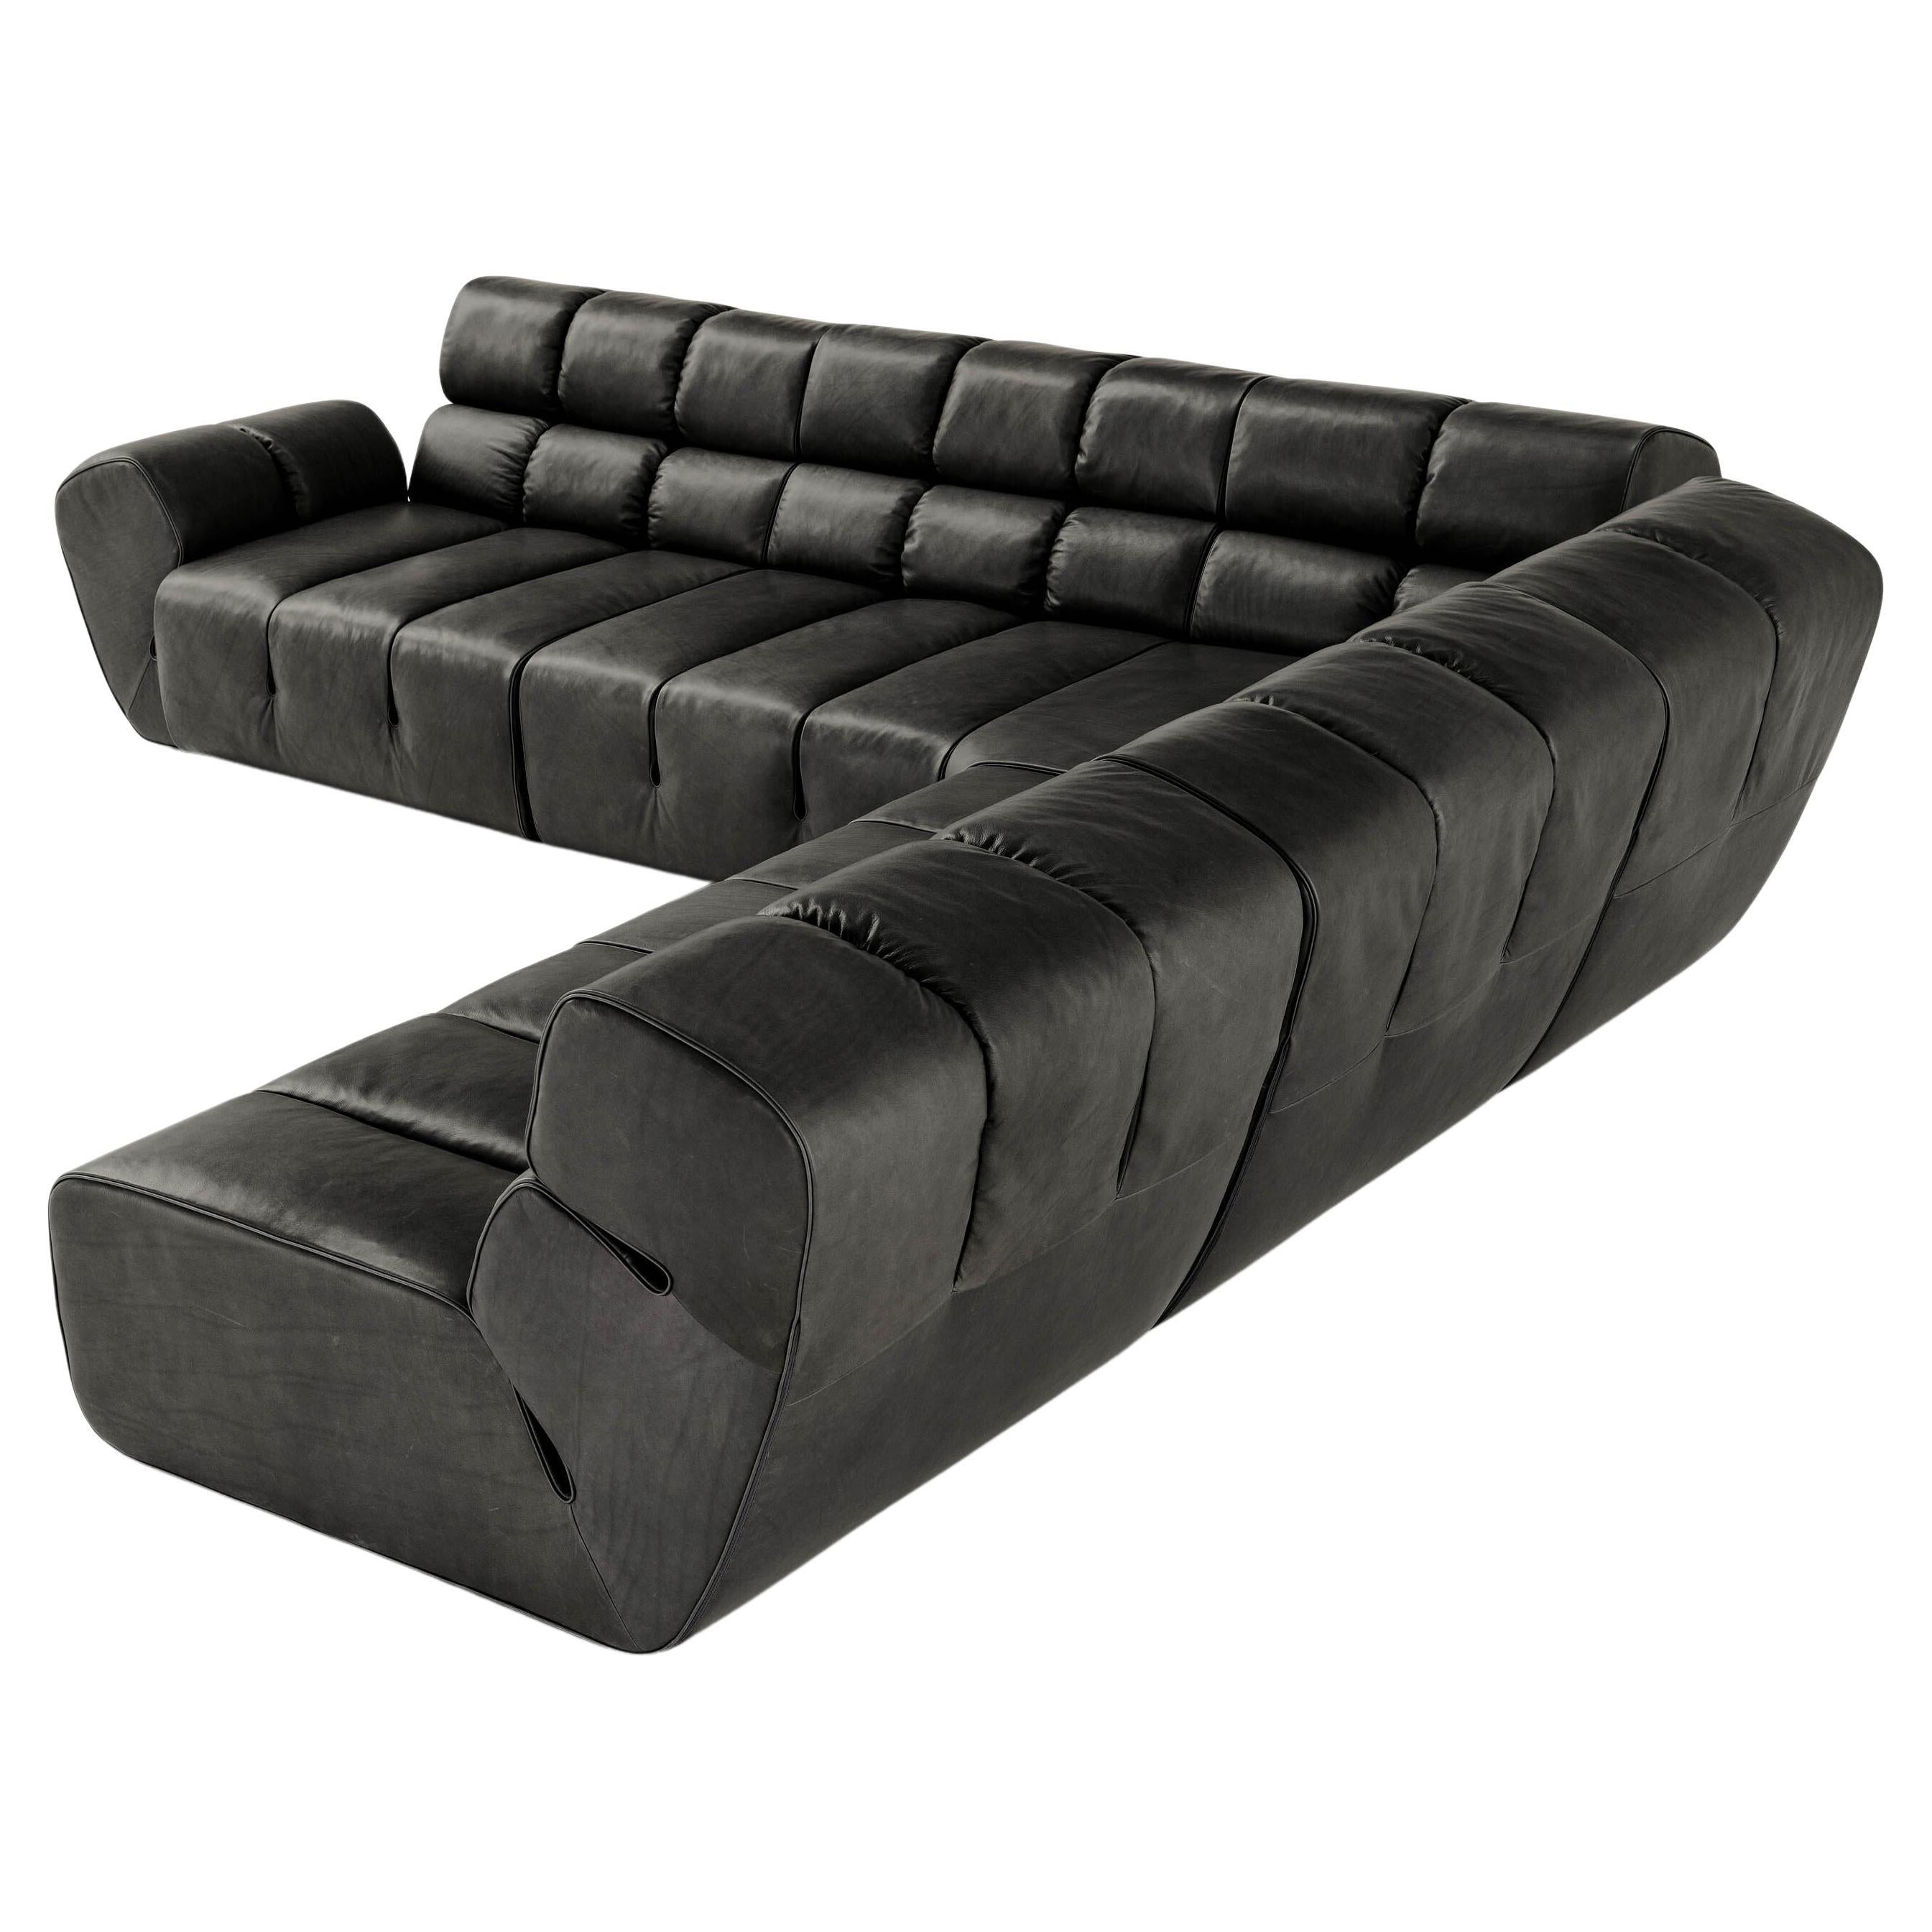 'Palmo' Modular Sofa in Leather, Stone Wash 263 For Sale